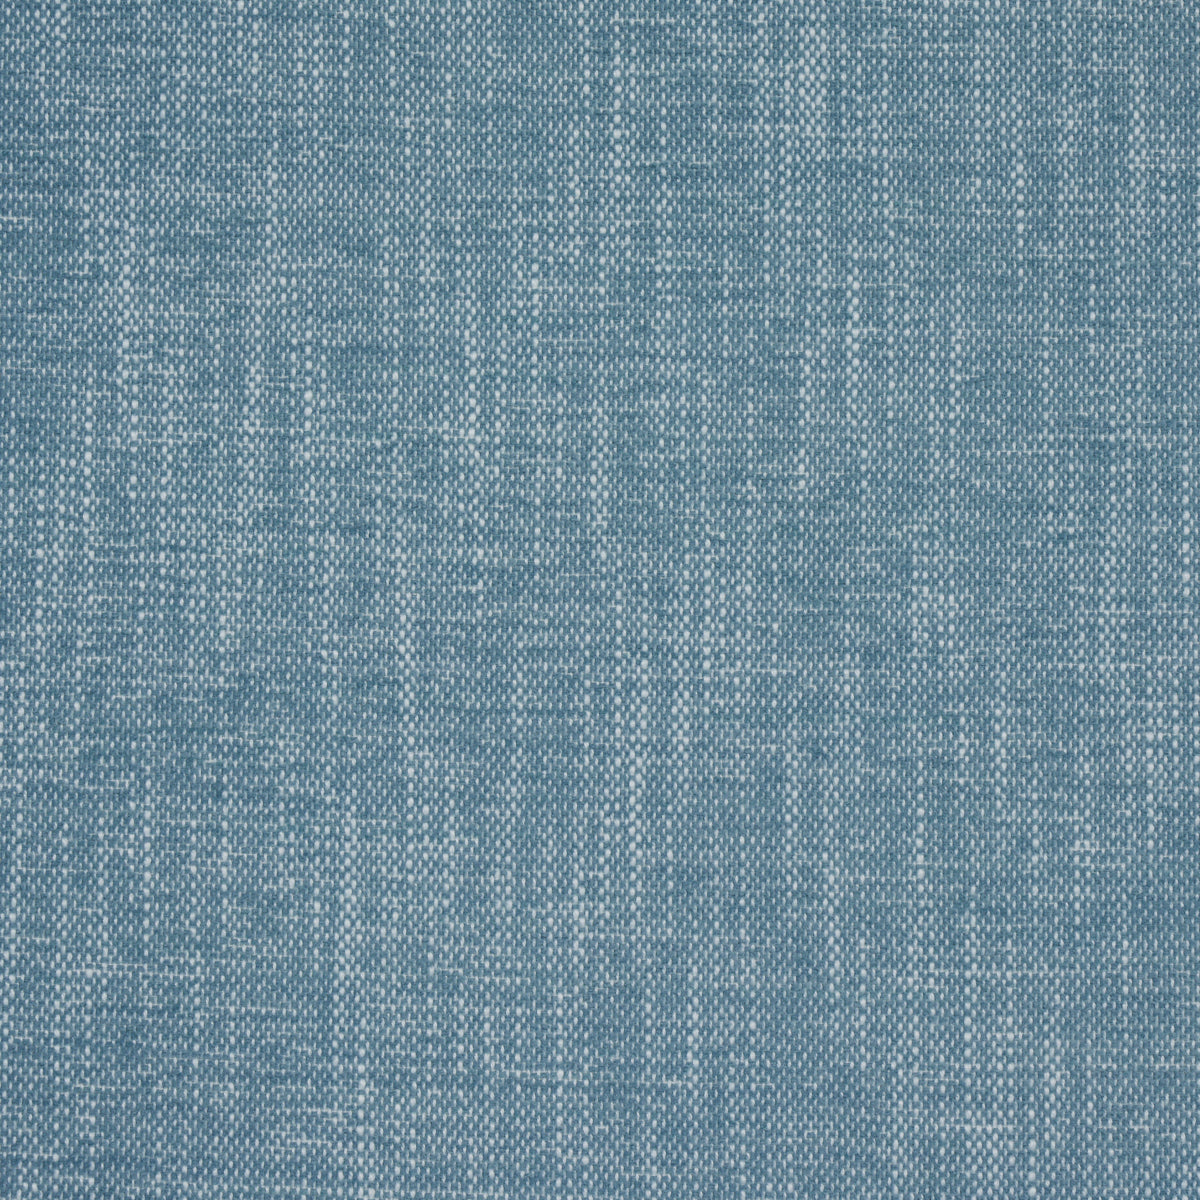 Chambray Fabric - Buy Chambray Fabric by the Yard at Best Price